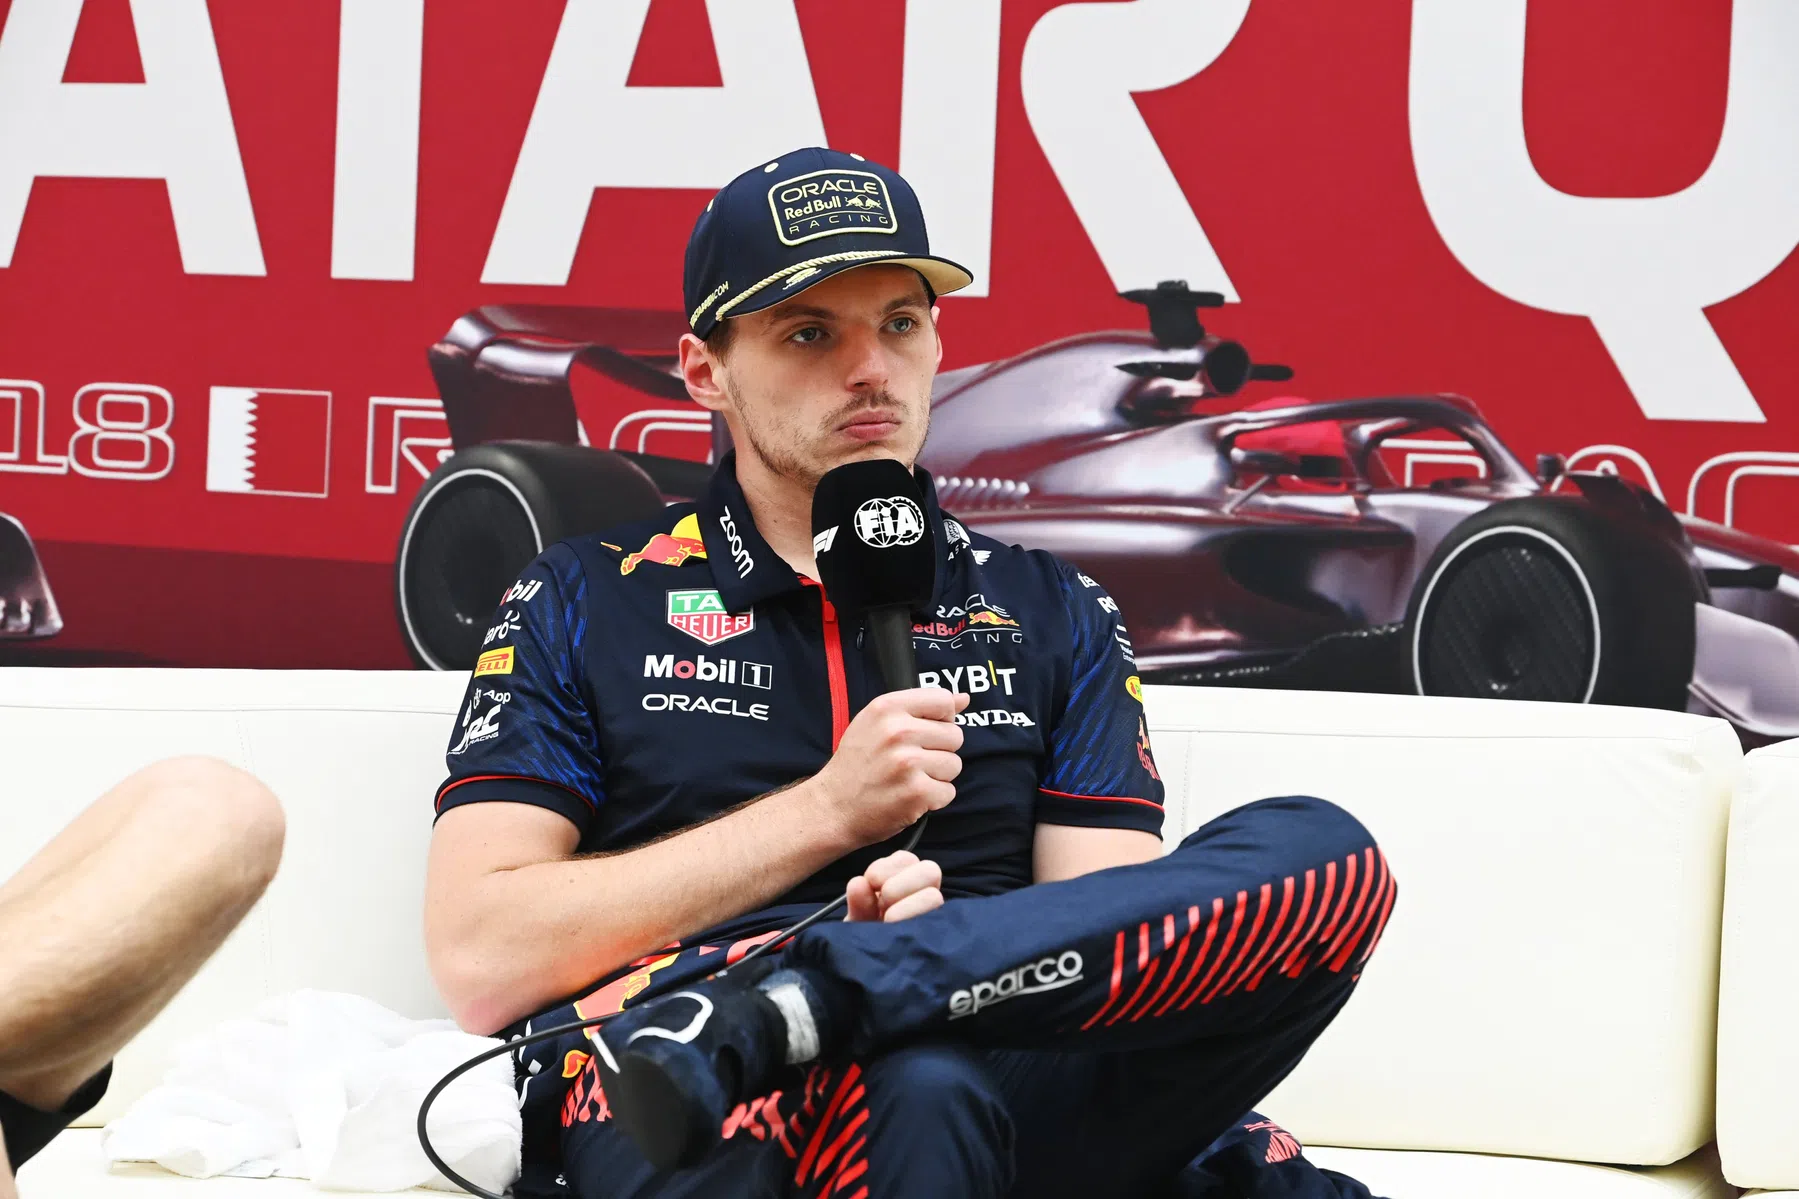 Ben Sulayem on why Verstappen doesn't get trophy yet